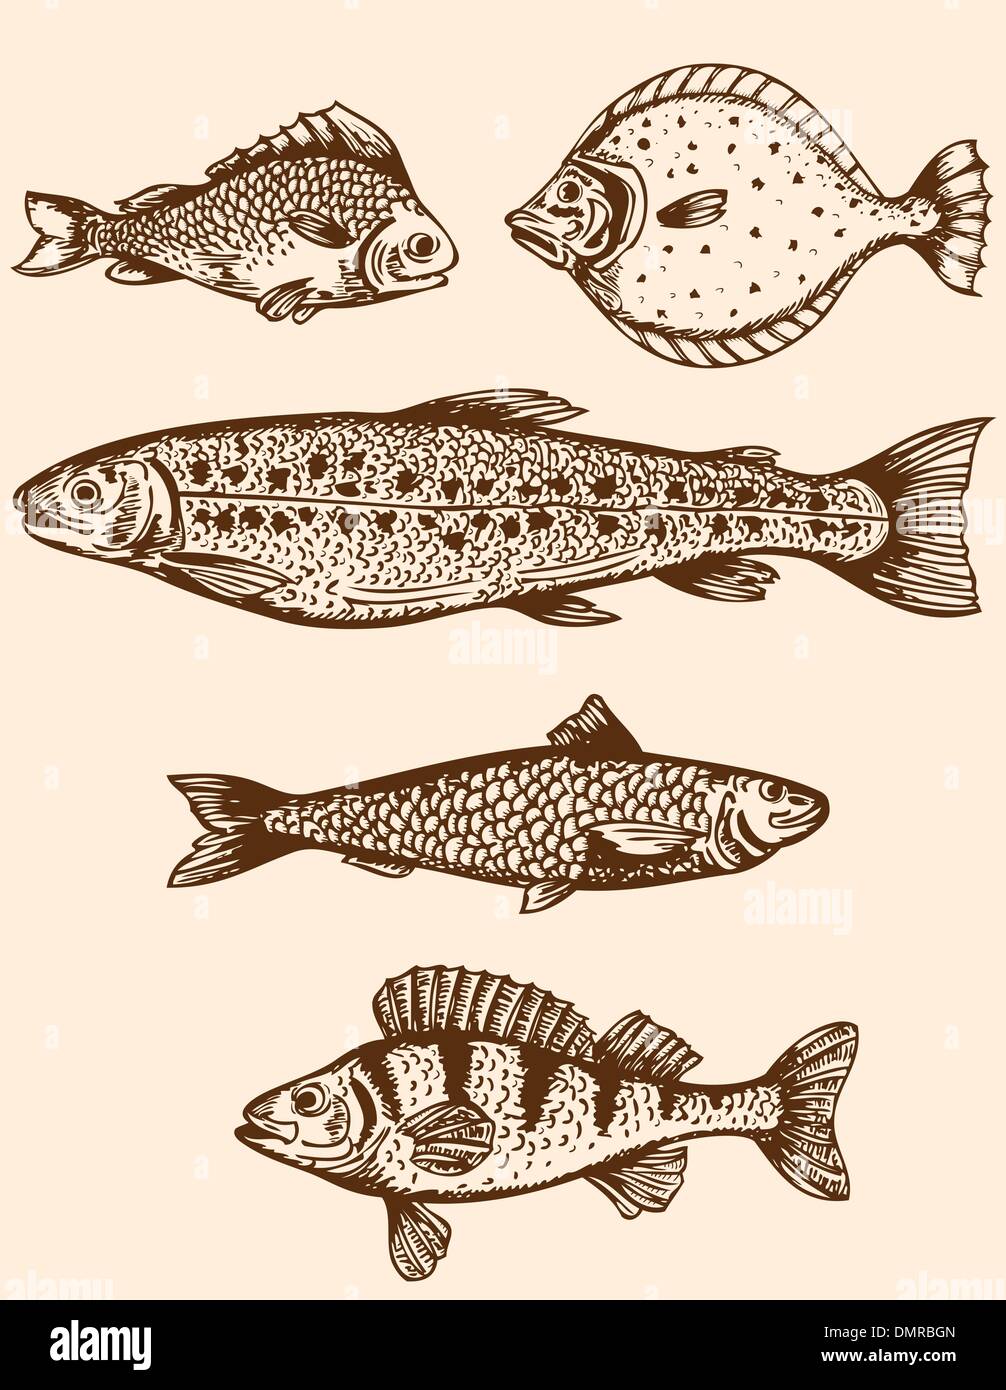 Fish drawing vintage Stock Vector Images - Alamy